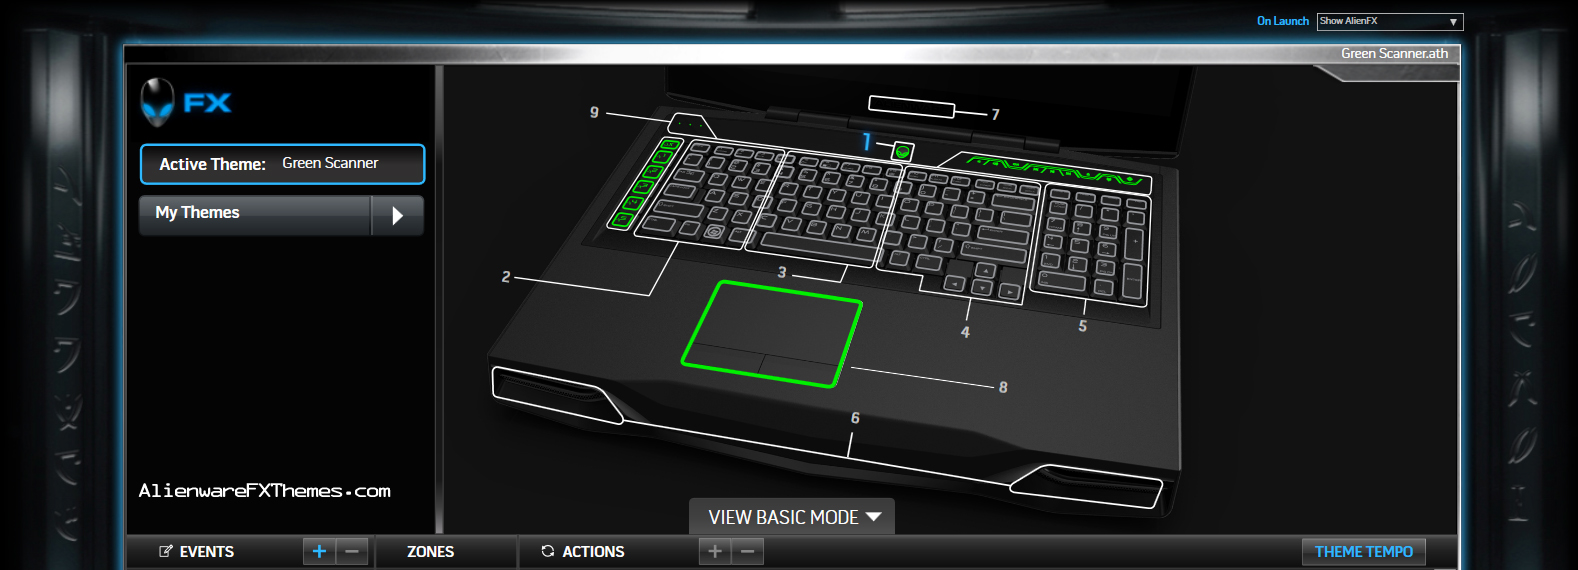 Green Scanner By PyRo Alienware M18x R2 Theme